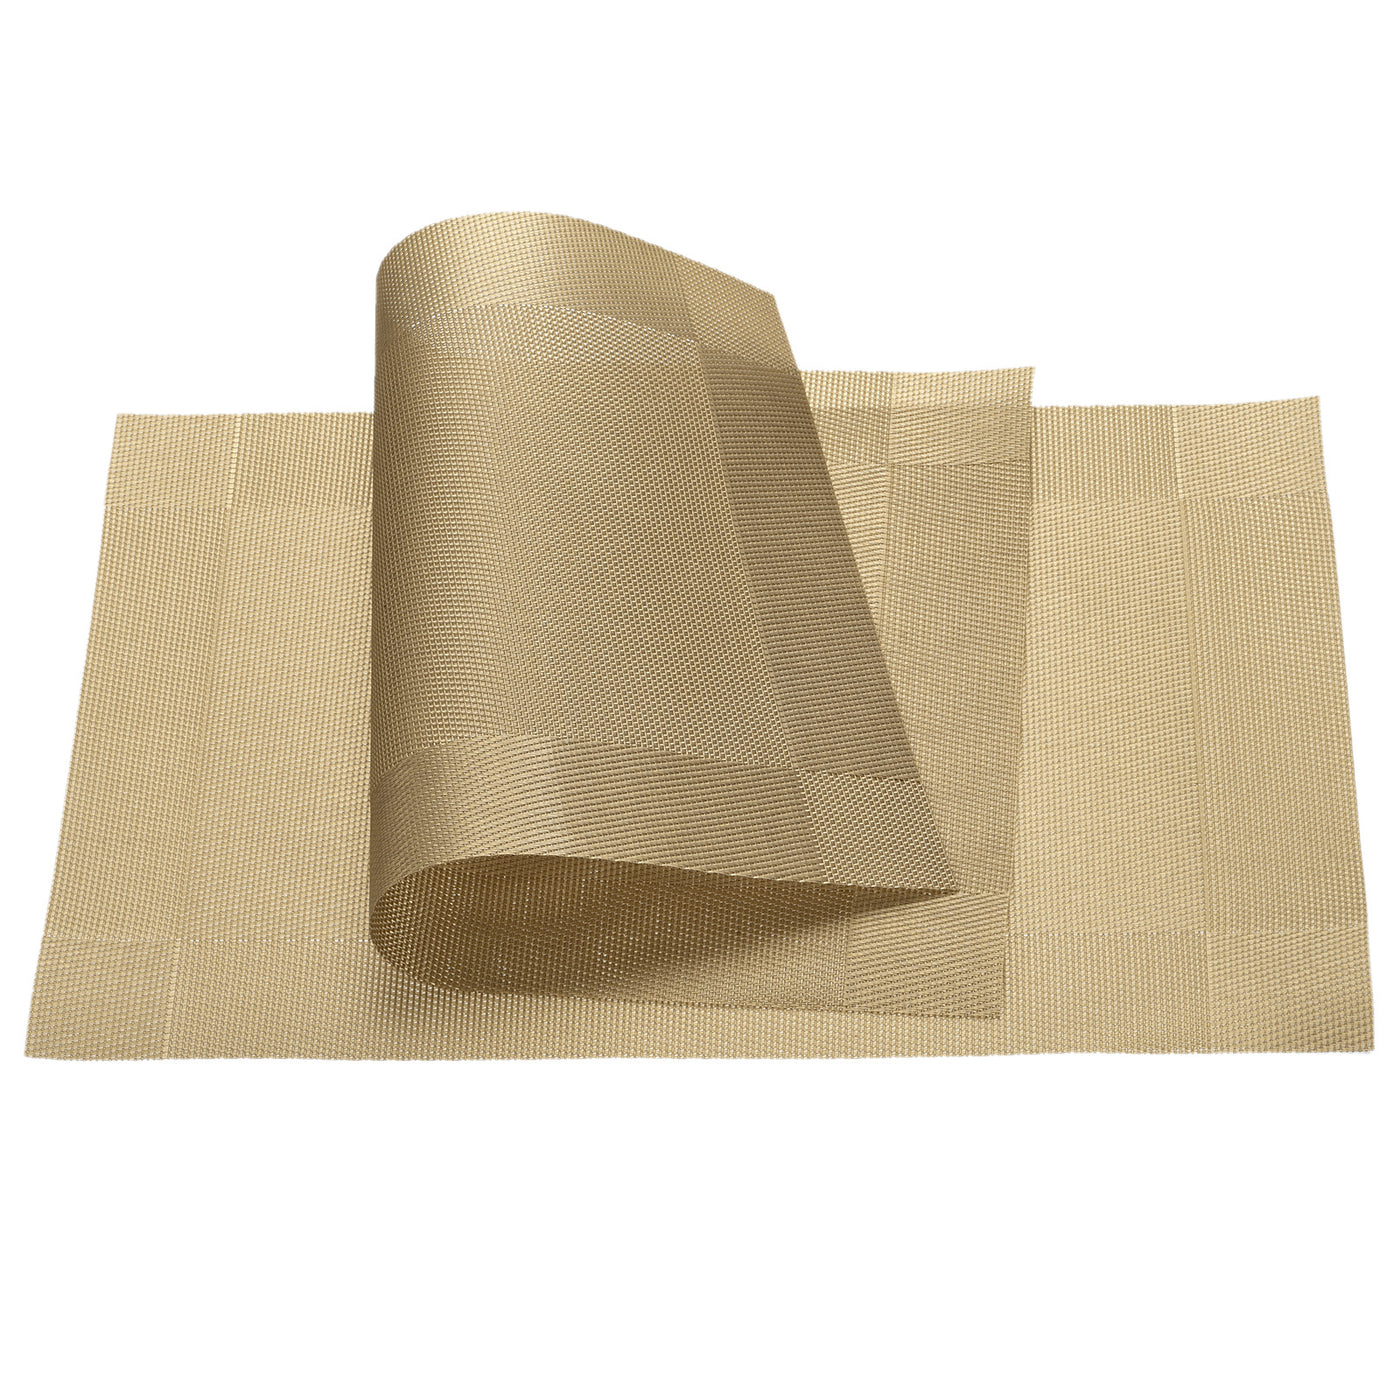 uxcell Uxcell Place Mats 450x300mm 6pcs PVC Table Washable Woven Placemat, Gold Tone